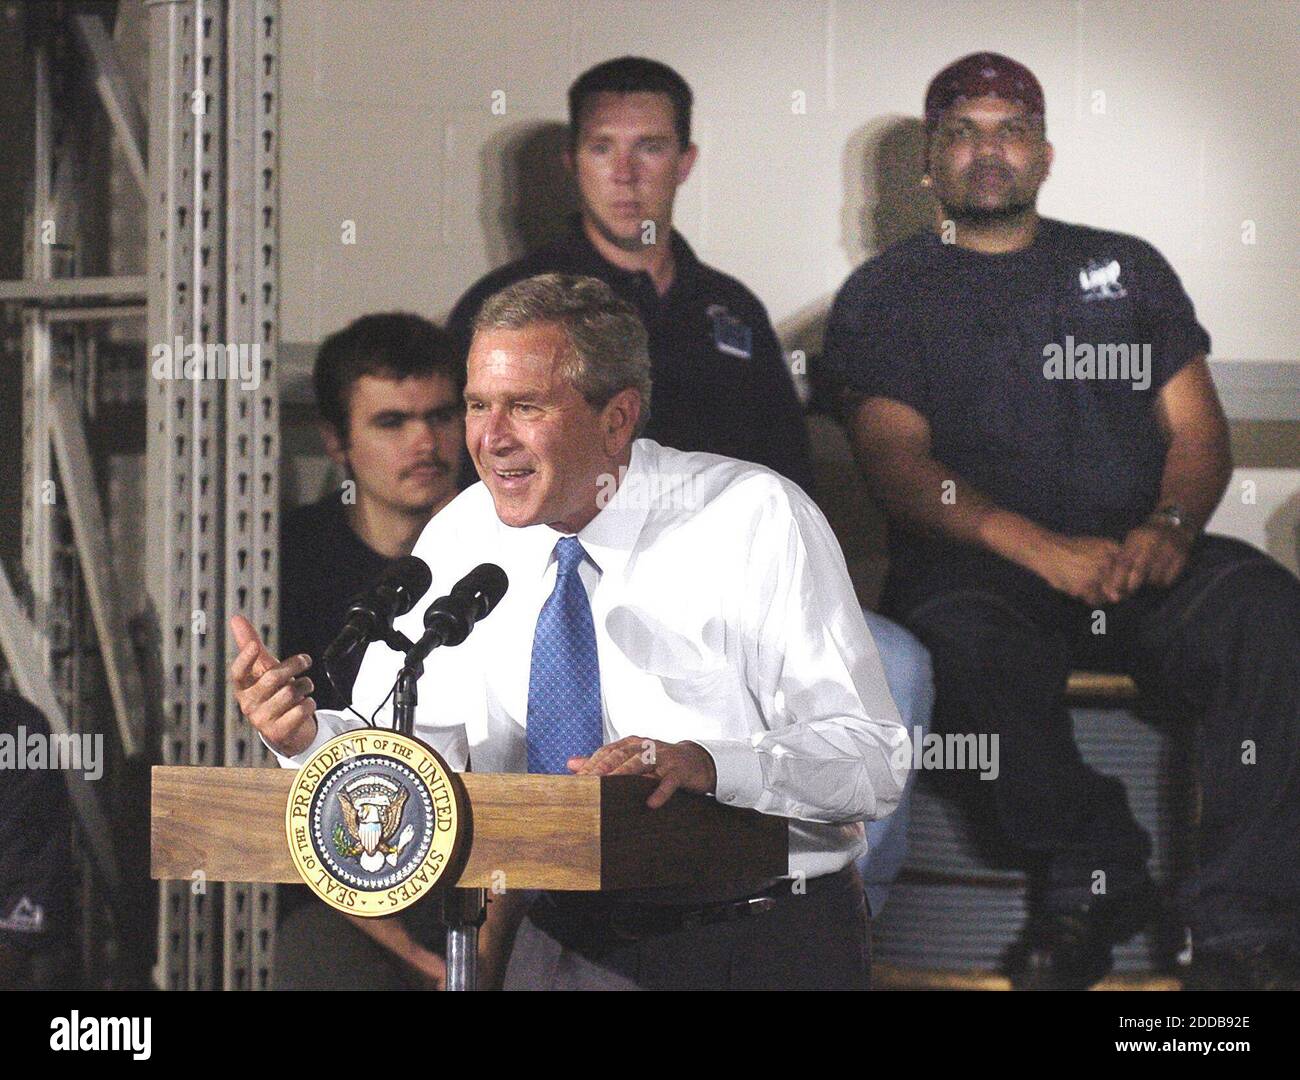 NO FILM, NO VIDEO, NO TV, NO DOCUMENTARY - President George W. Bush speaks to workers at Lapp Electric Service Inc. in Smoketown, Pennsylvania, on Friday, July 9, 2004. Photo by Ron Cortes/KRT/ABACA. Stock Photo